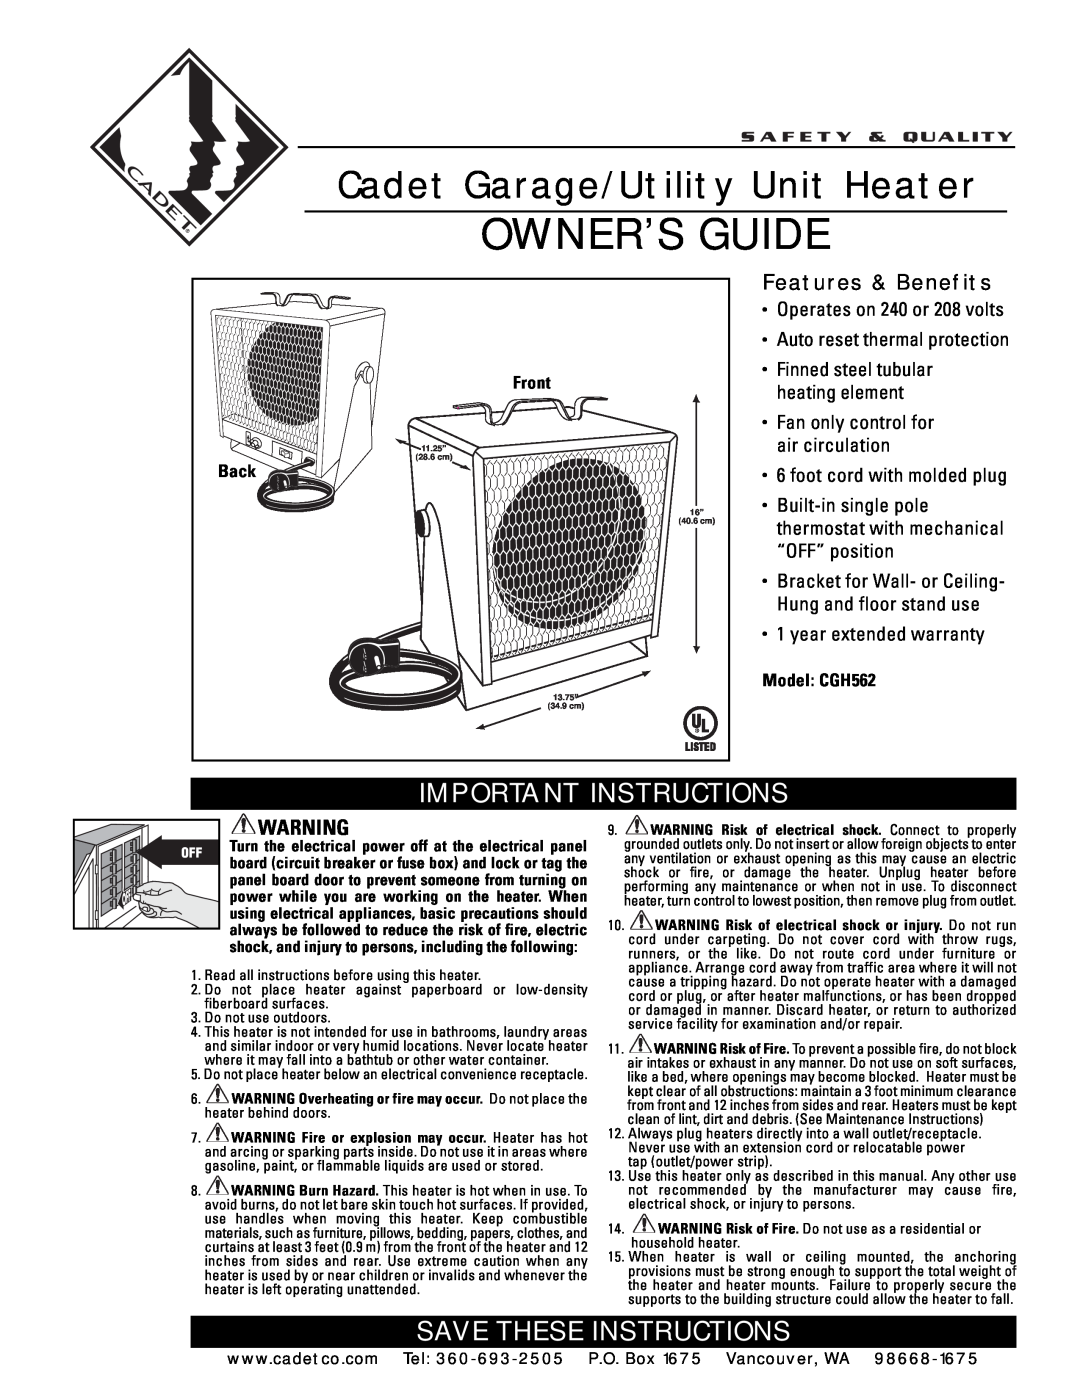 Cadet CGH562 warranty Operates on 240 or 208 volts, Auto reset thermal protection, Fan only control for air circulation 